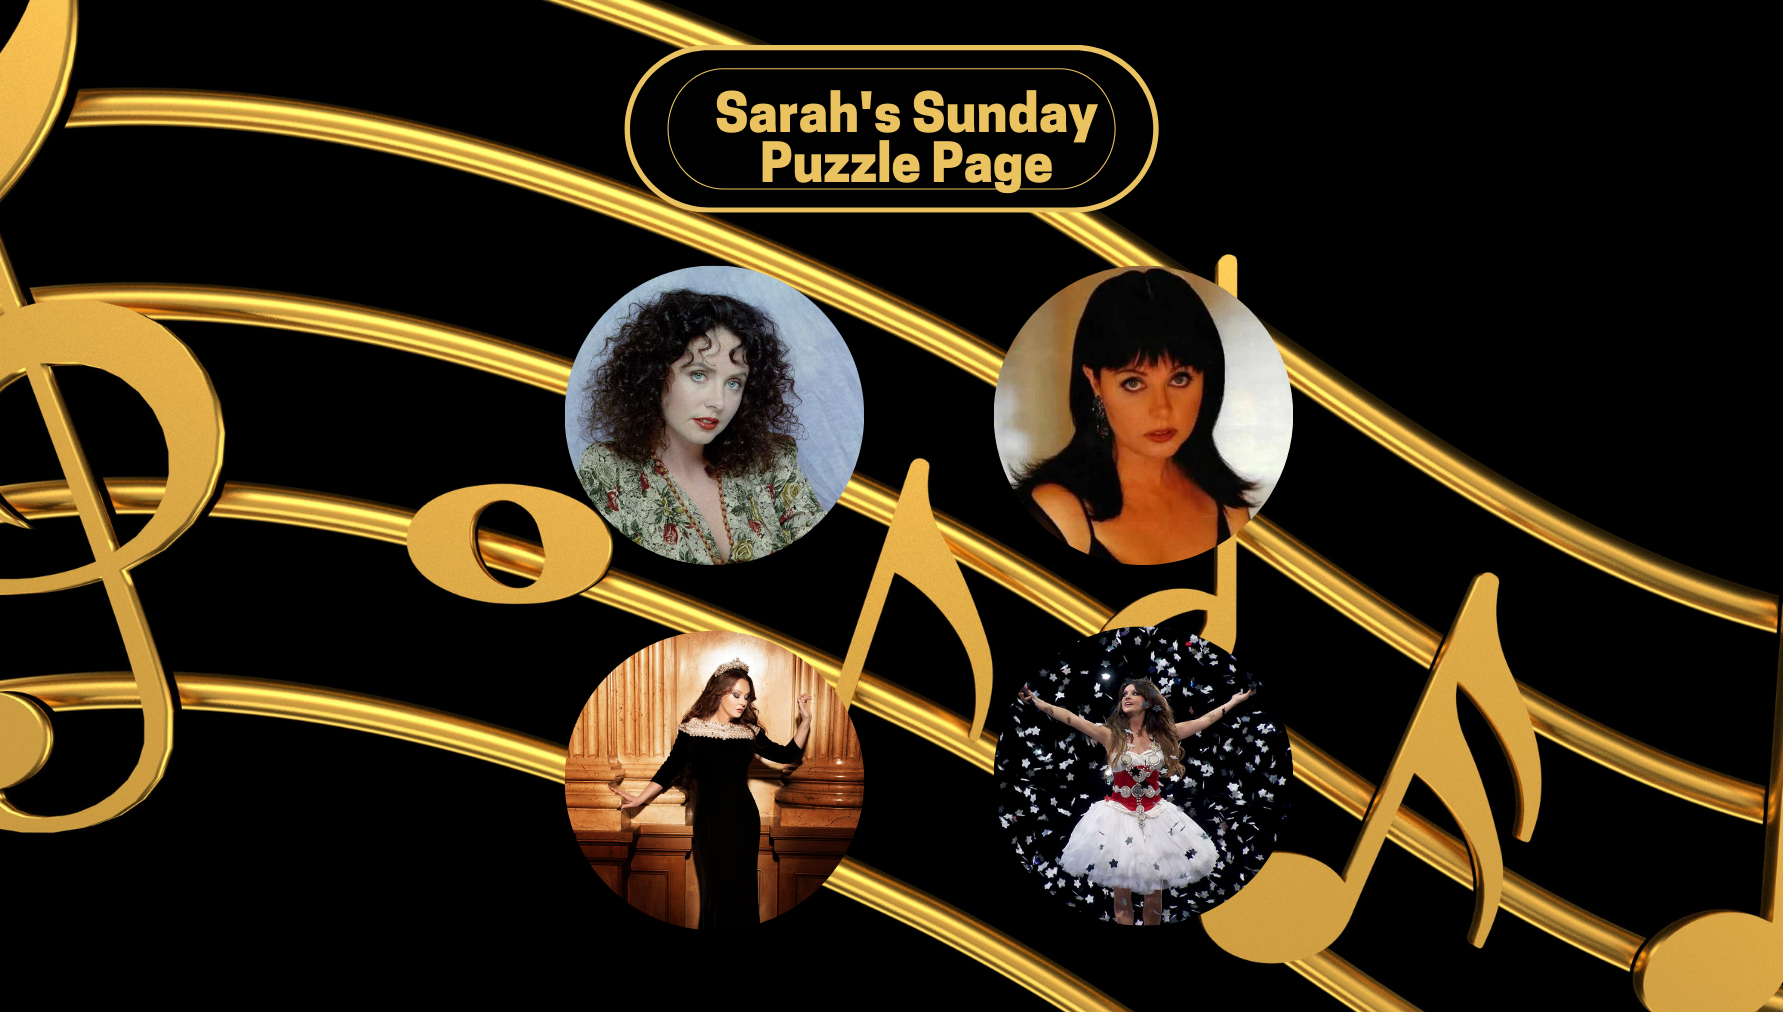 NEW: Sarah's Sunday Puzzle Page - The Greatest Hits 